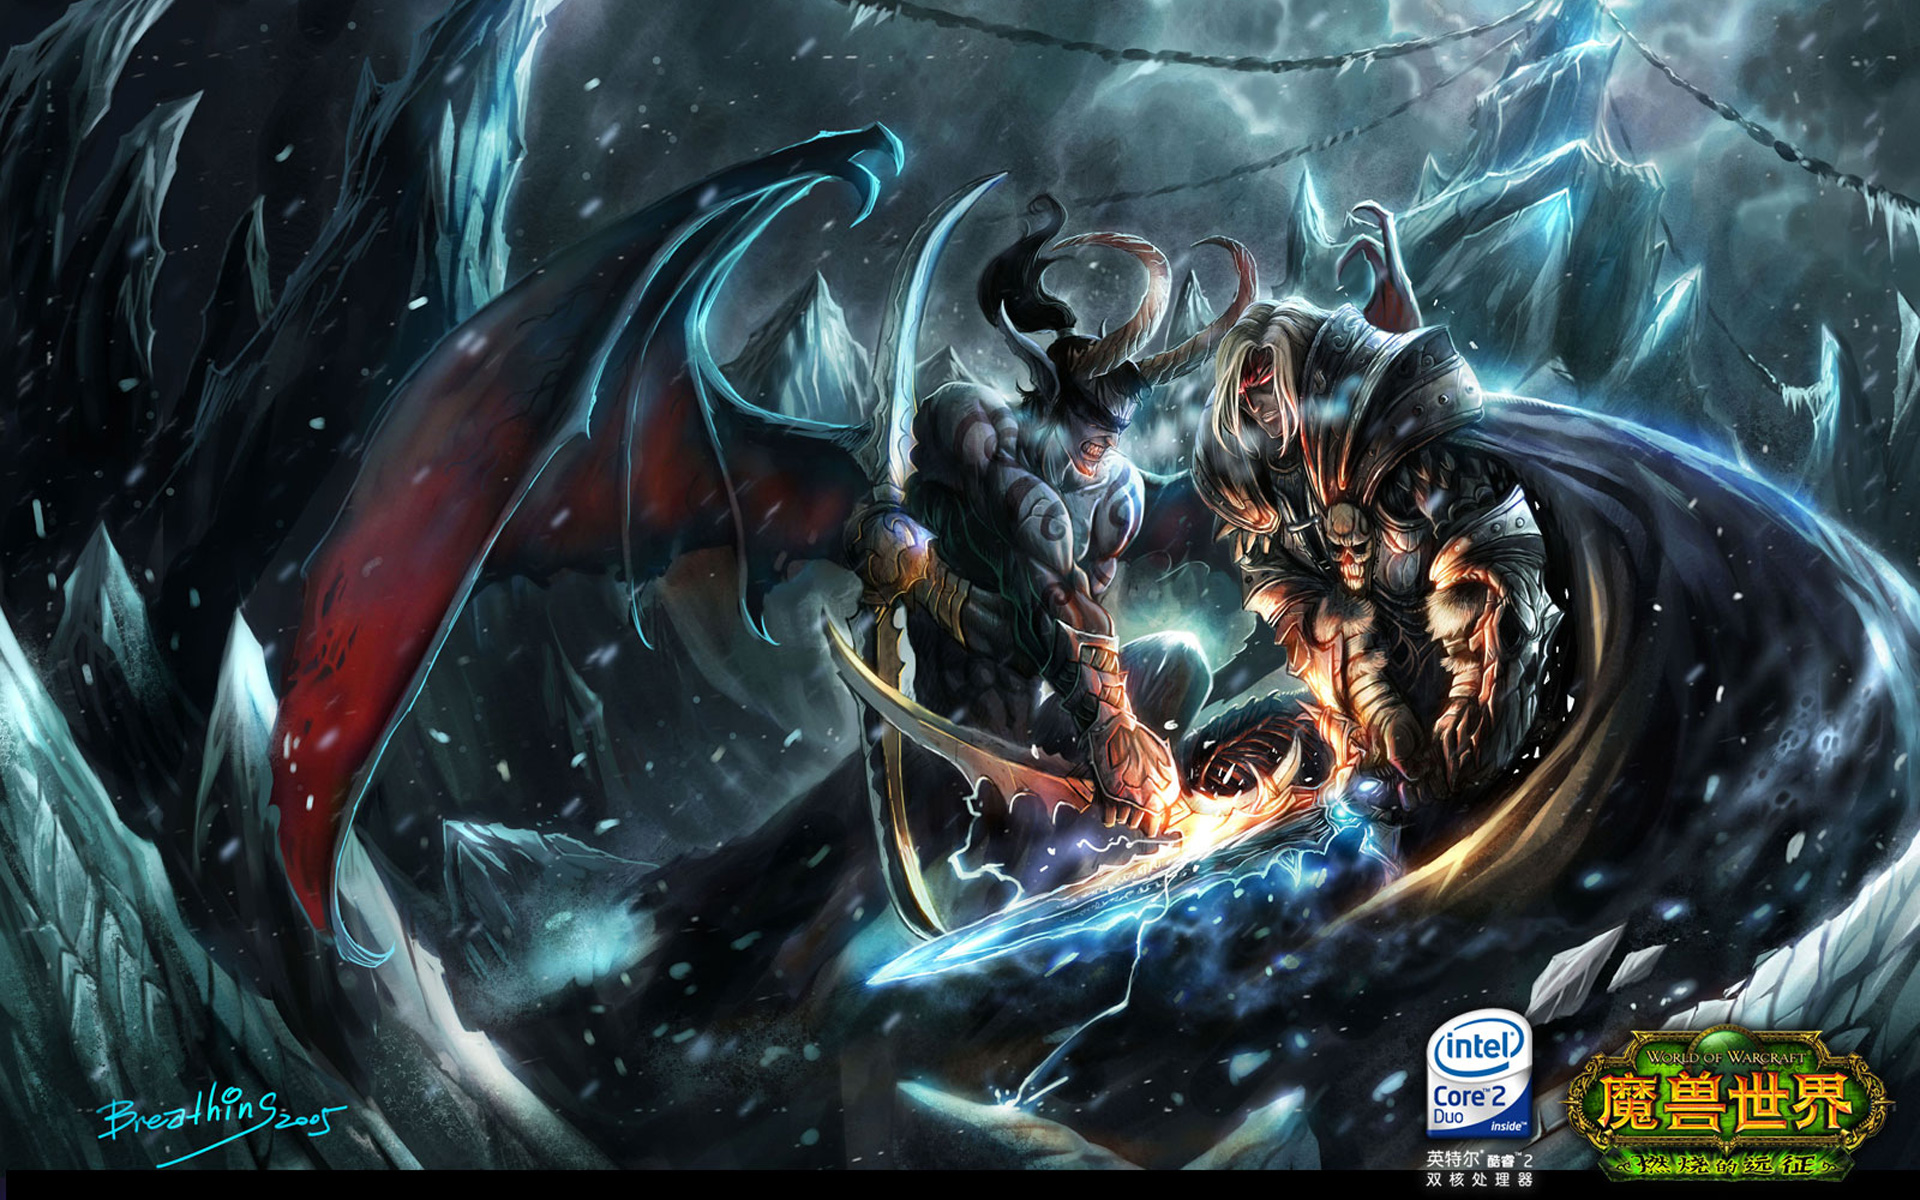 World Of Warcraft Wallpaper In